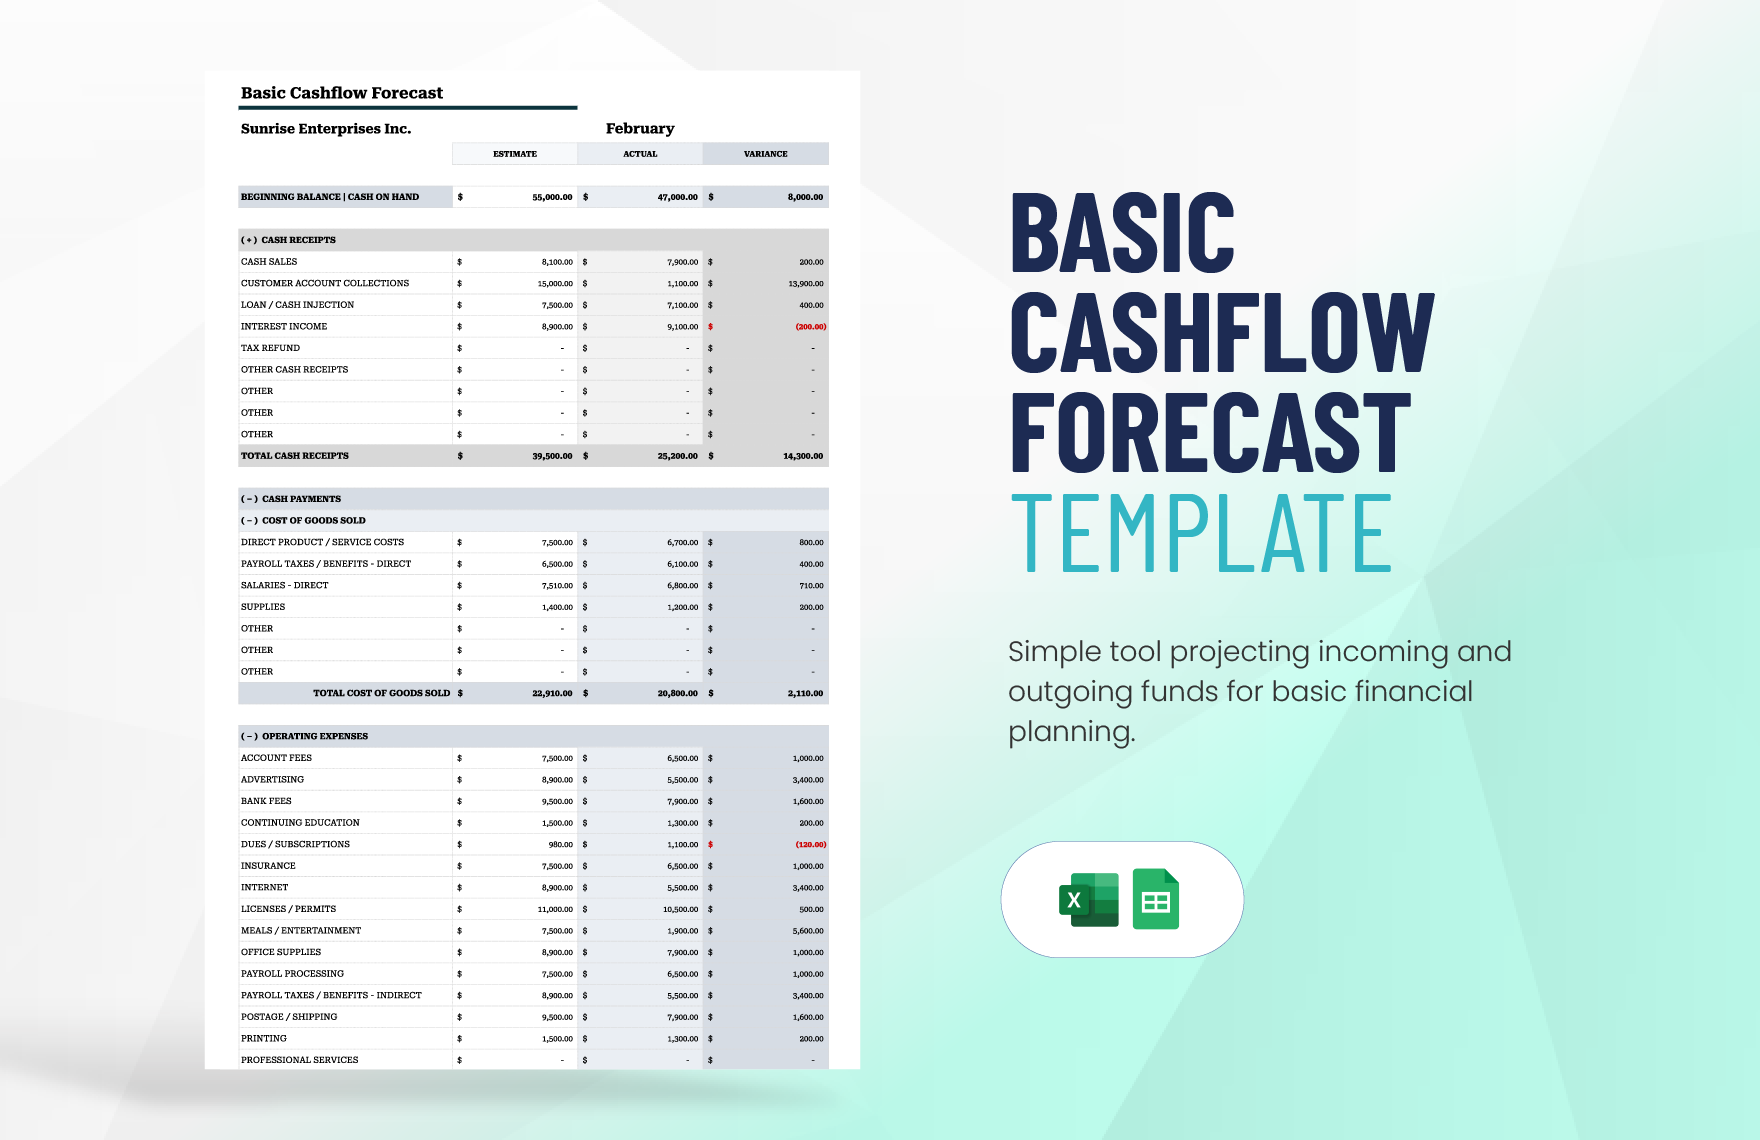 Basic Cashflow Forecast Template in Excel, Google Sheets